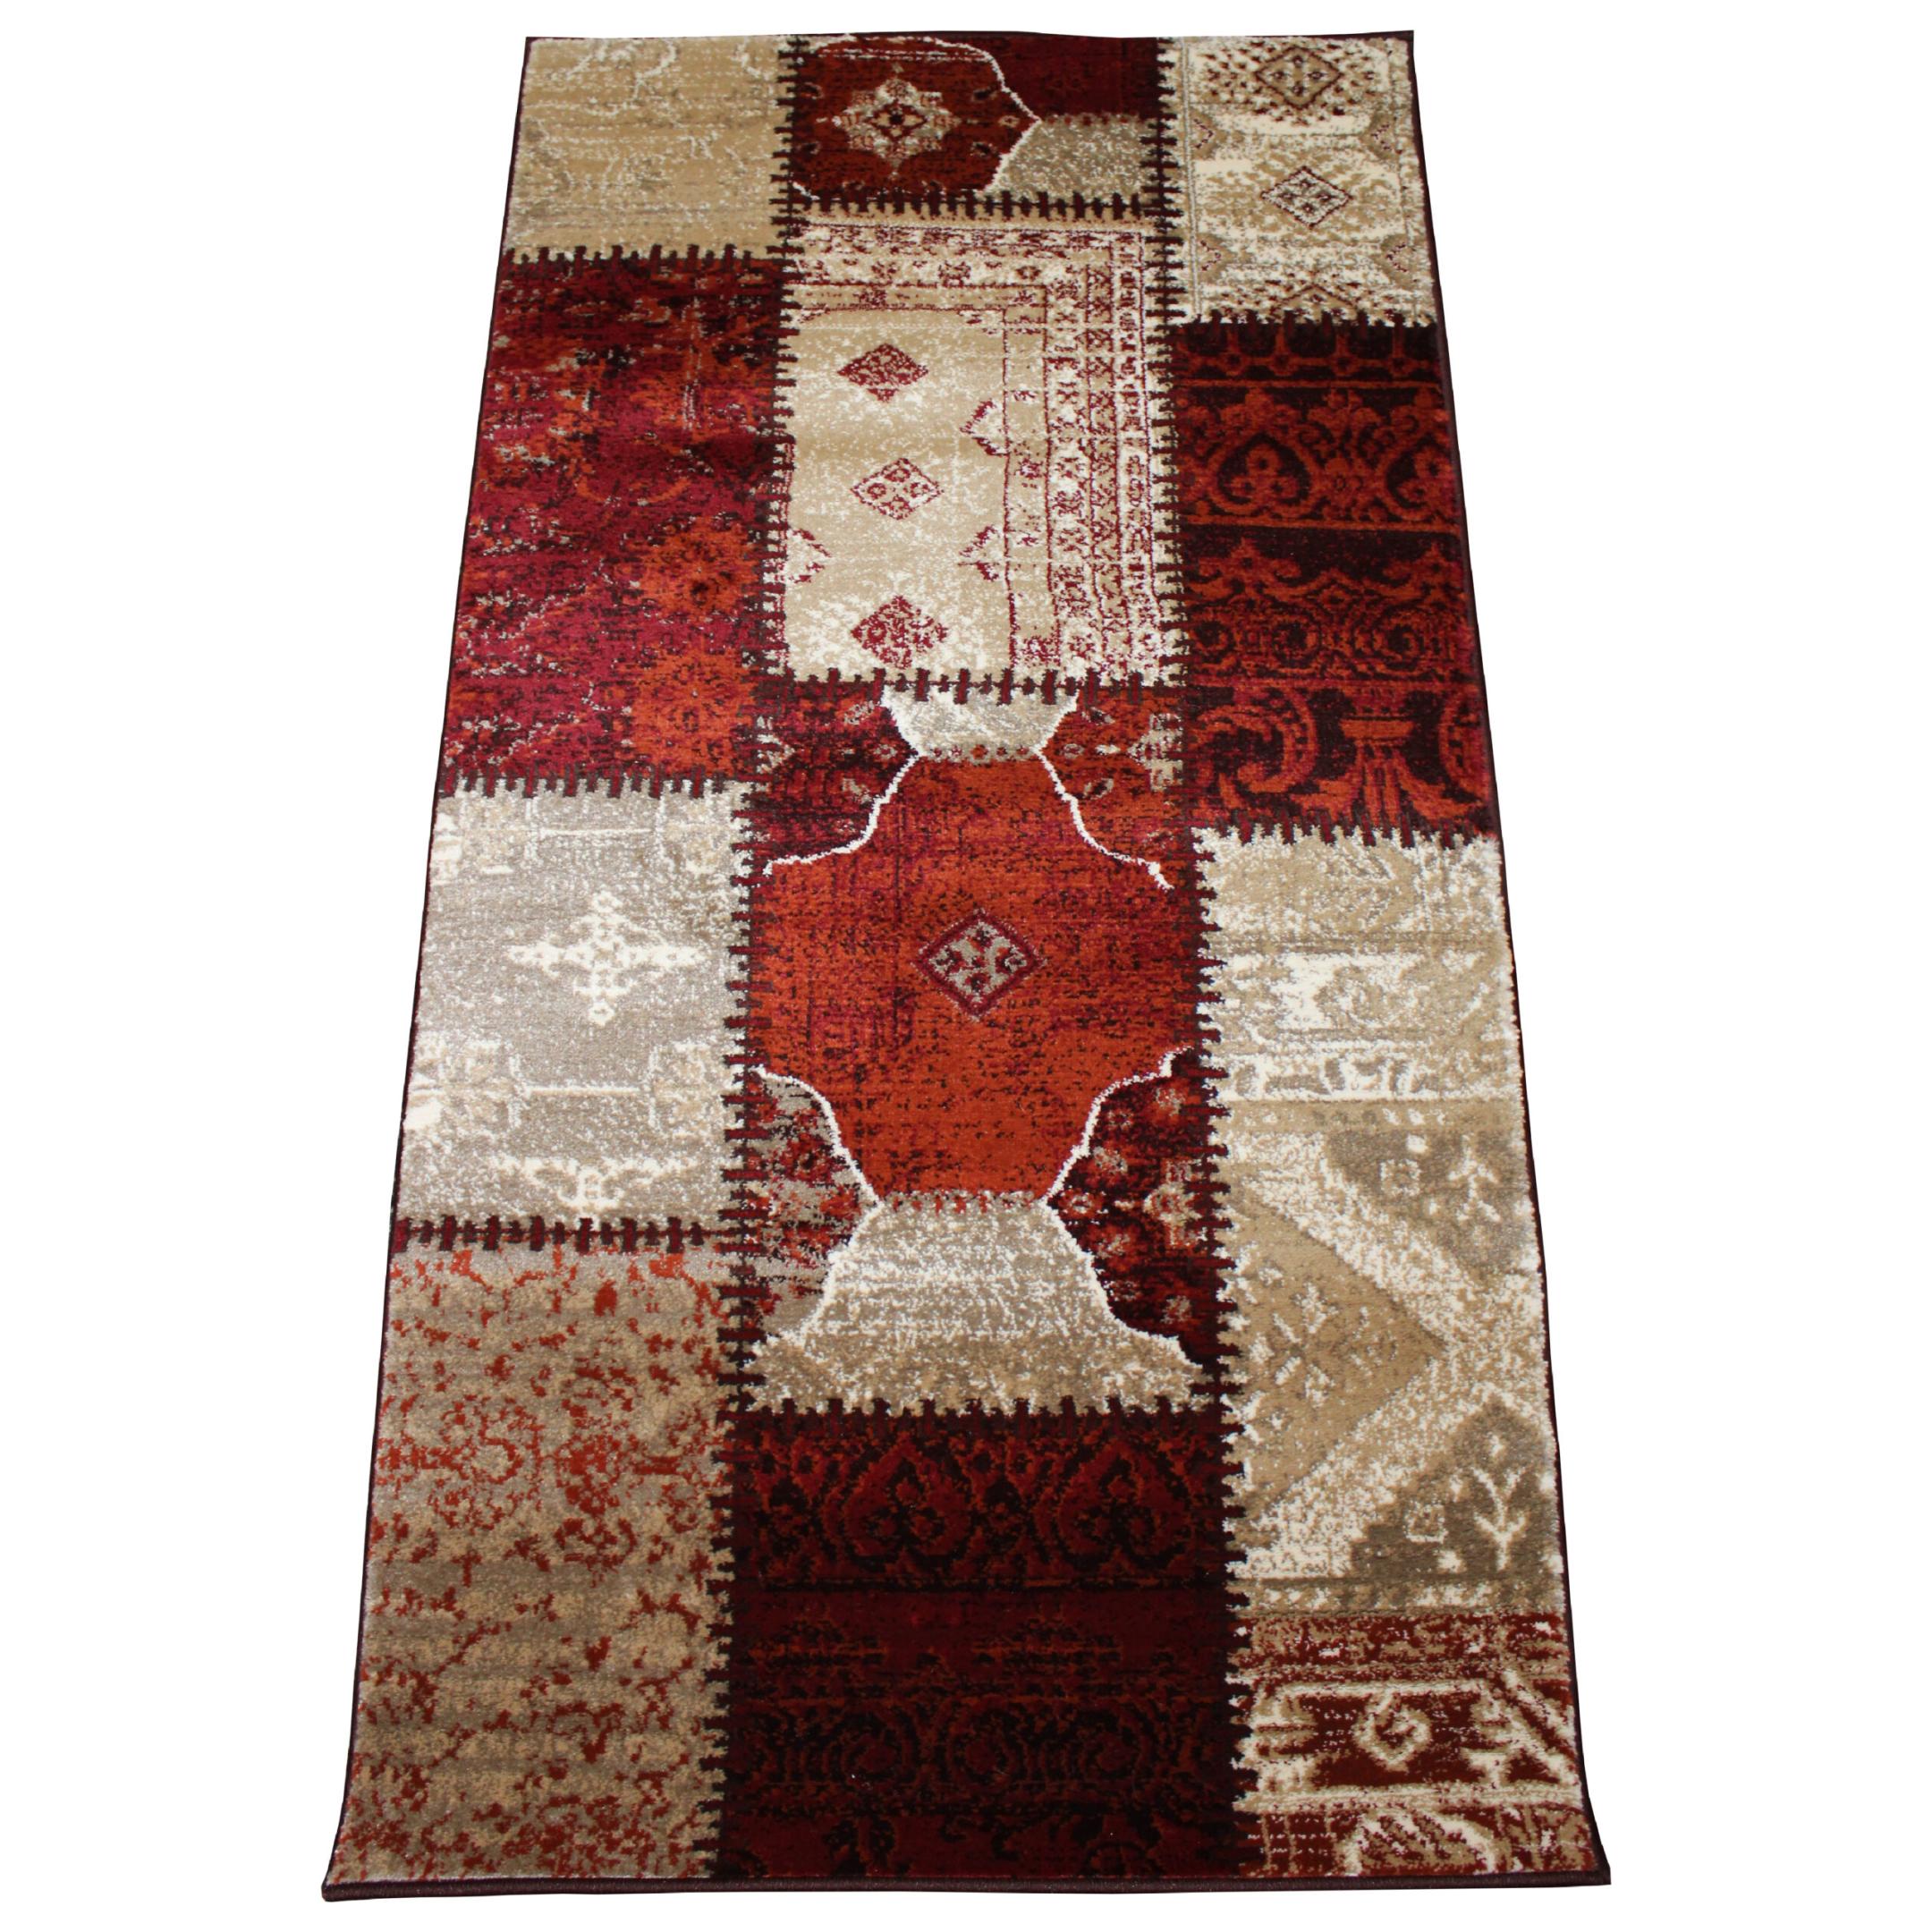 Terry's Rugs – Greatest selection of area rugs in the Ottawa